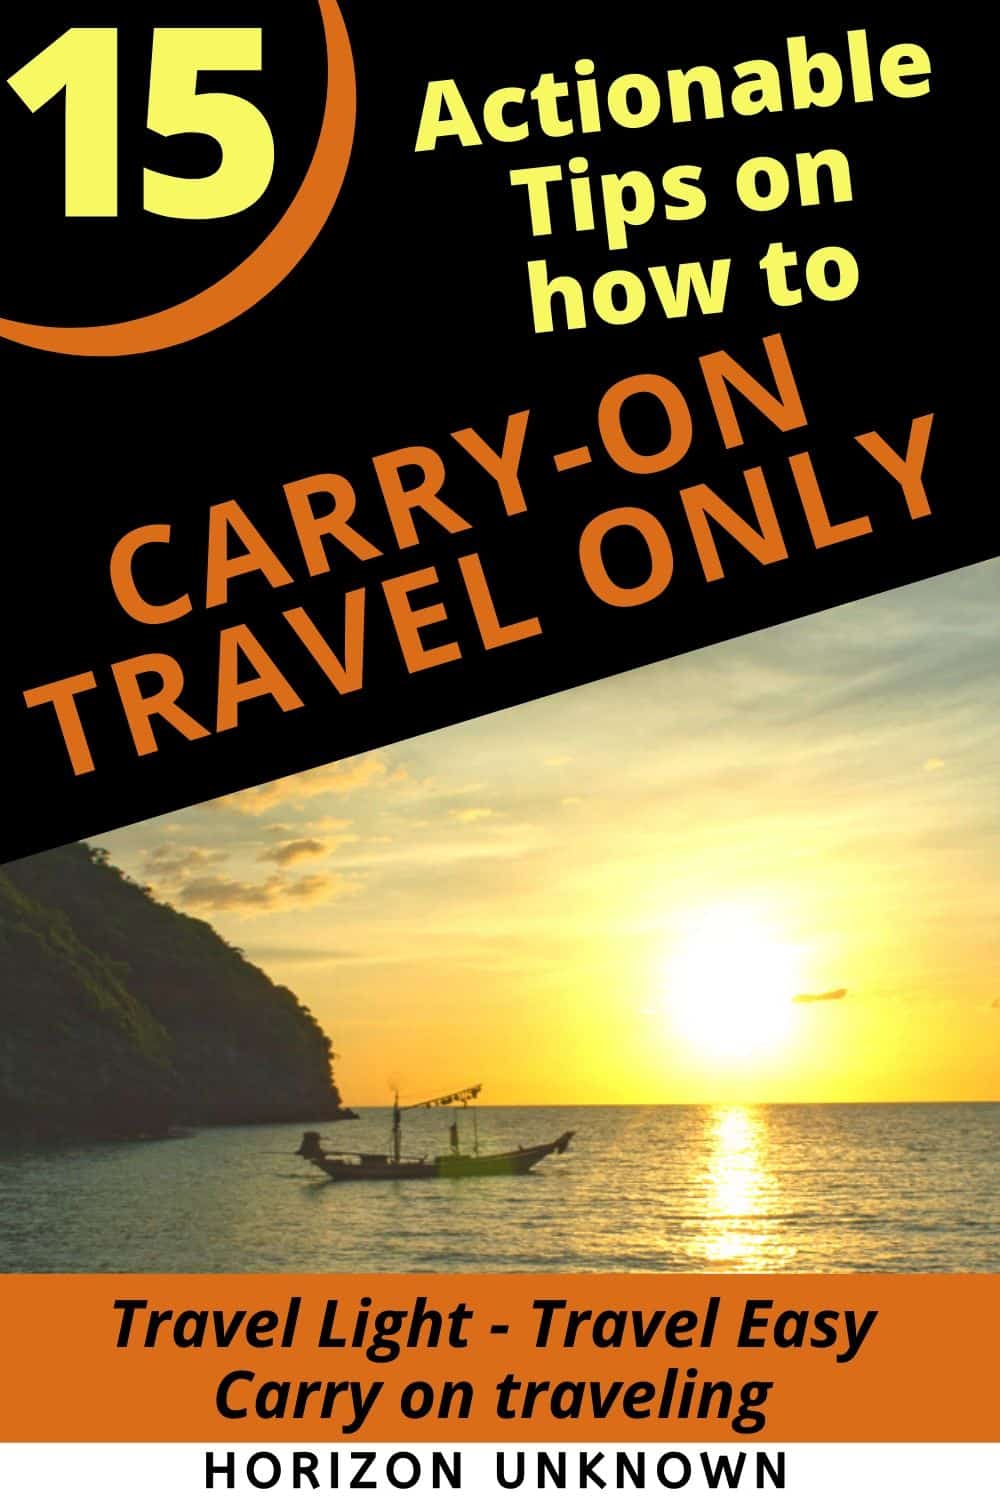 15 tips on how to travel carry-on only